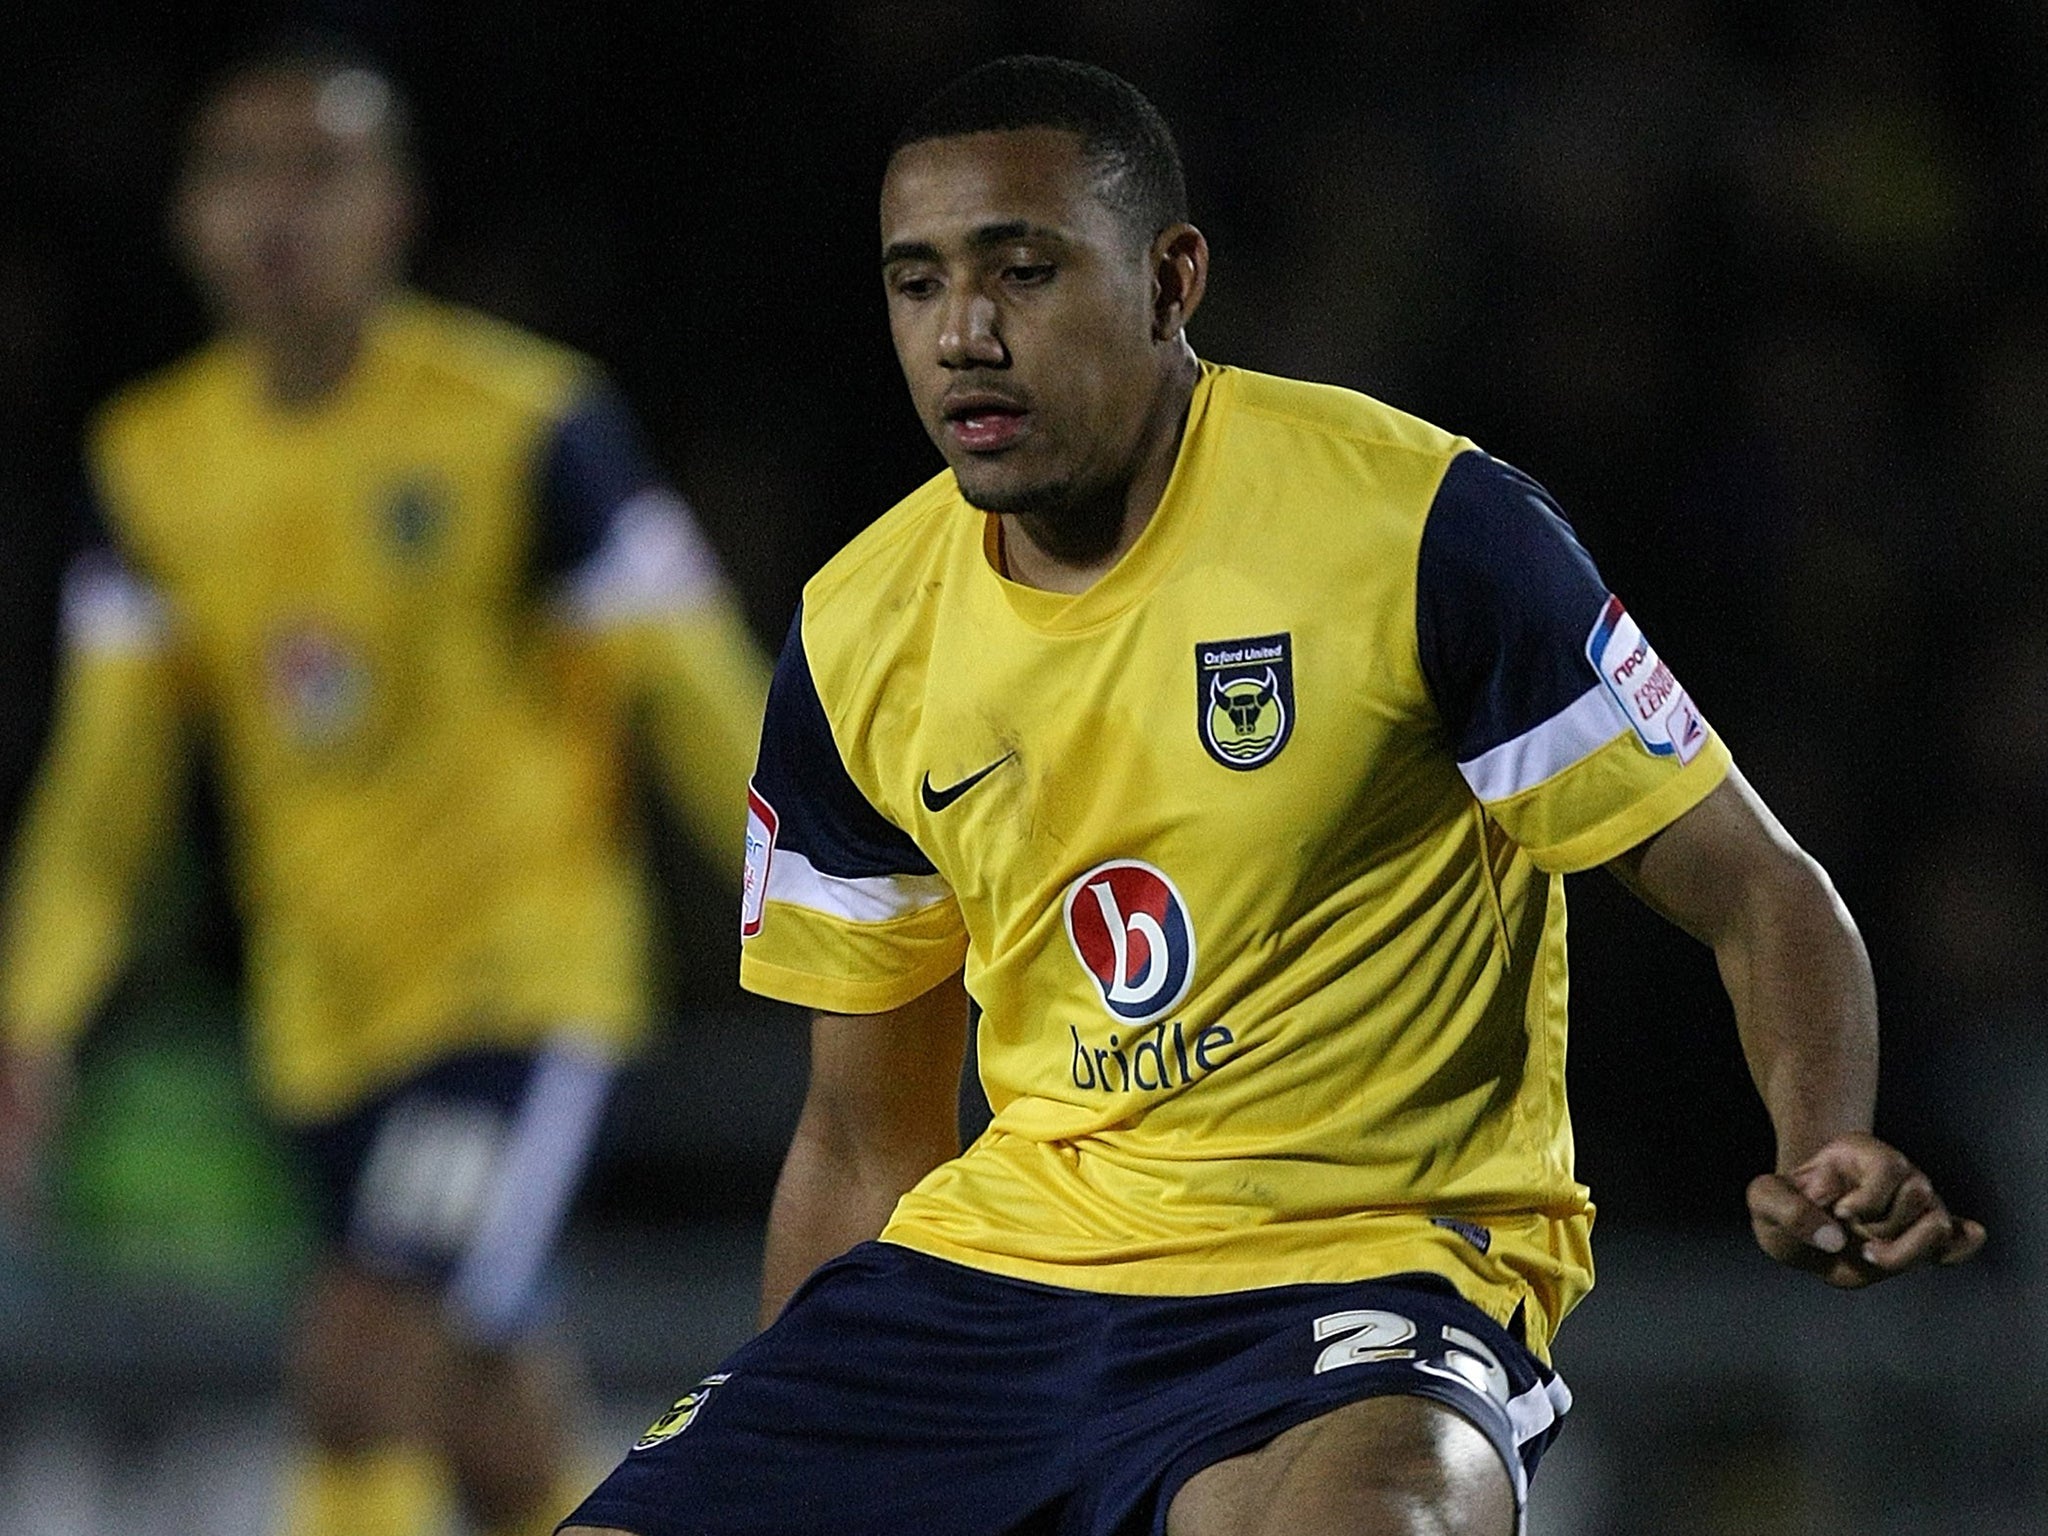 Cristian Montano playing for Oxford United in 2012